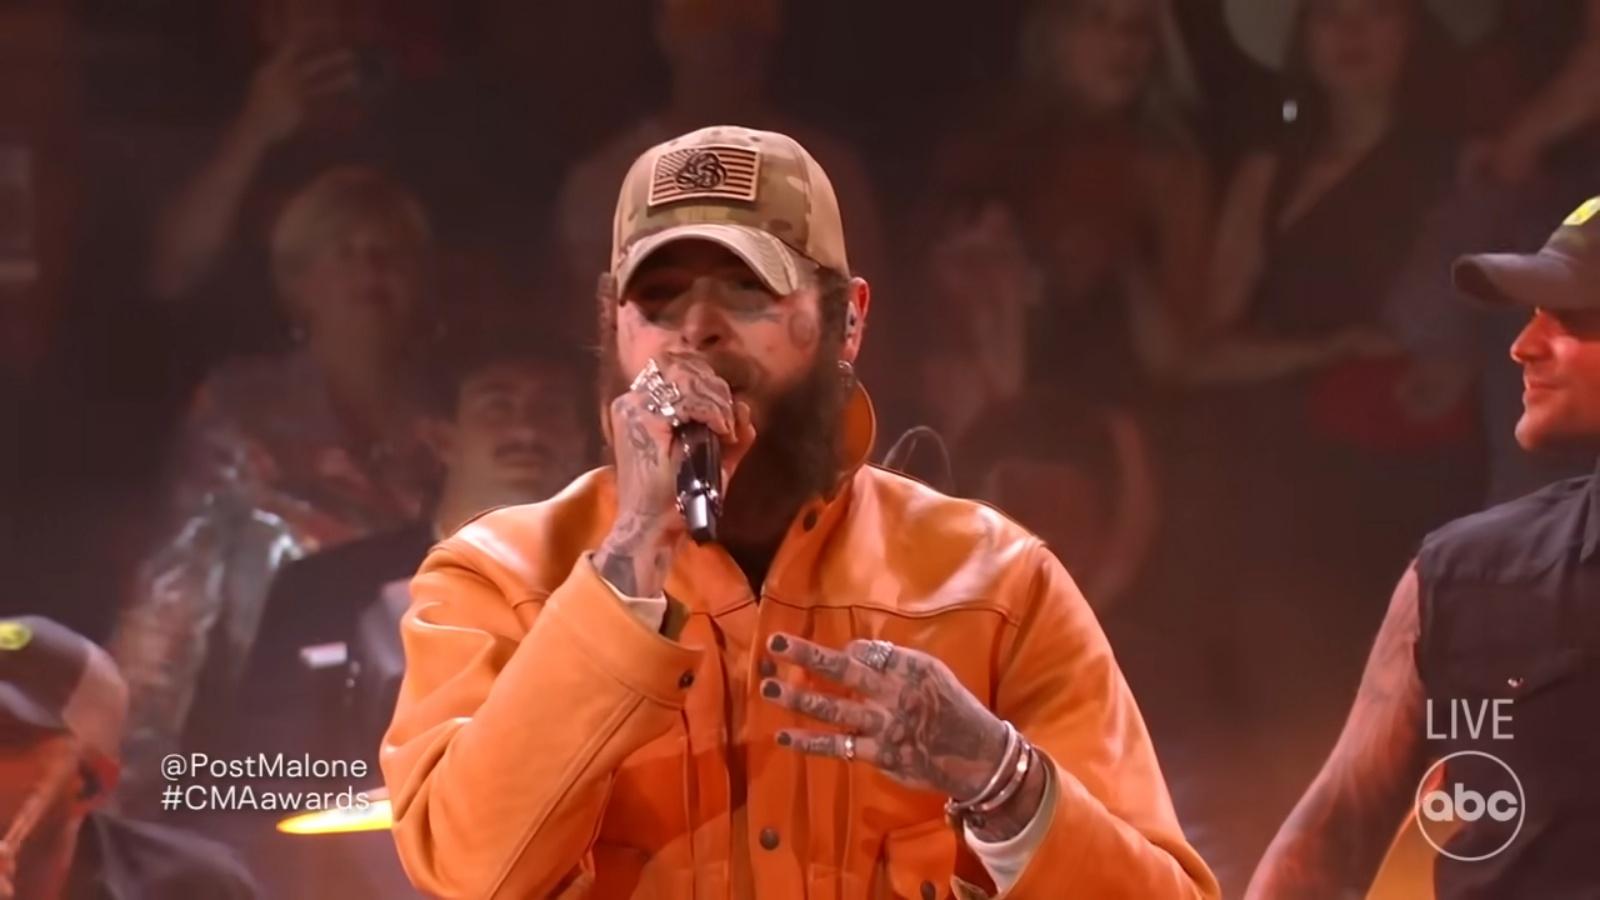 Post Malone performs in an orange outfit at the CMA Awards